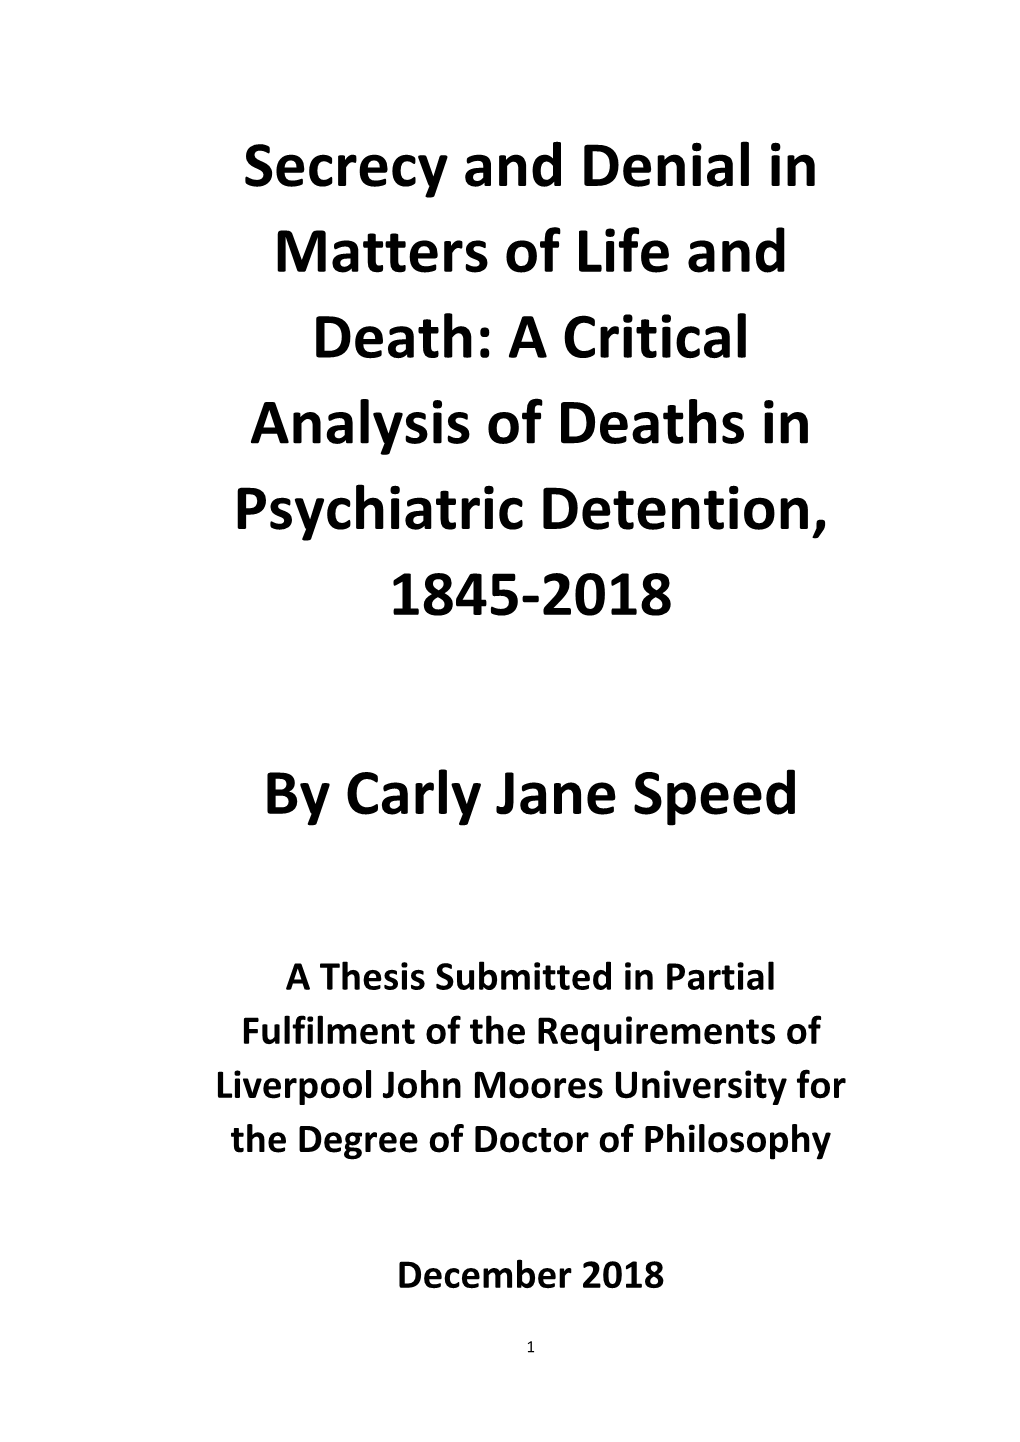 A Critical Analysis of Deaths in Psychiatric Detention, 1845-2018